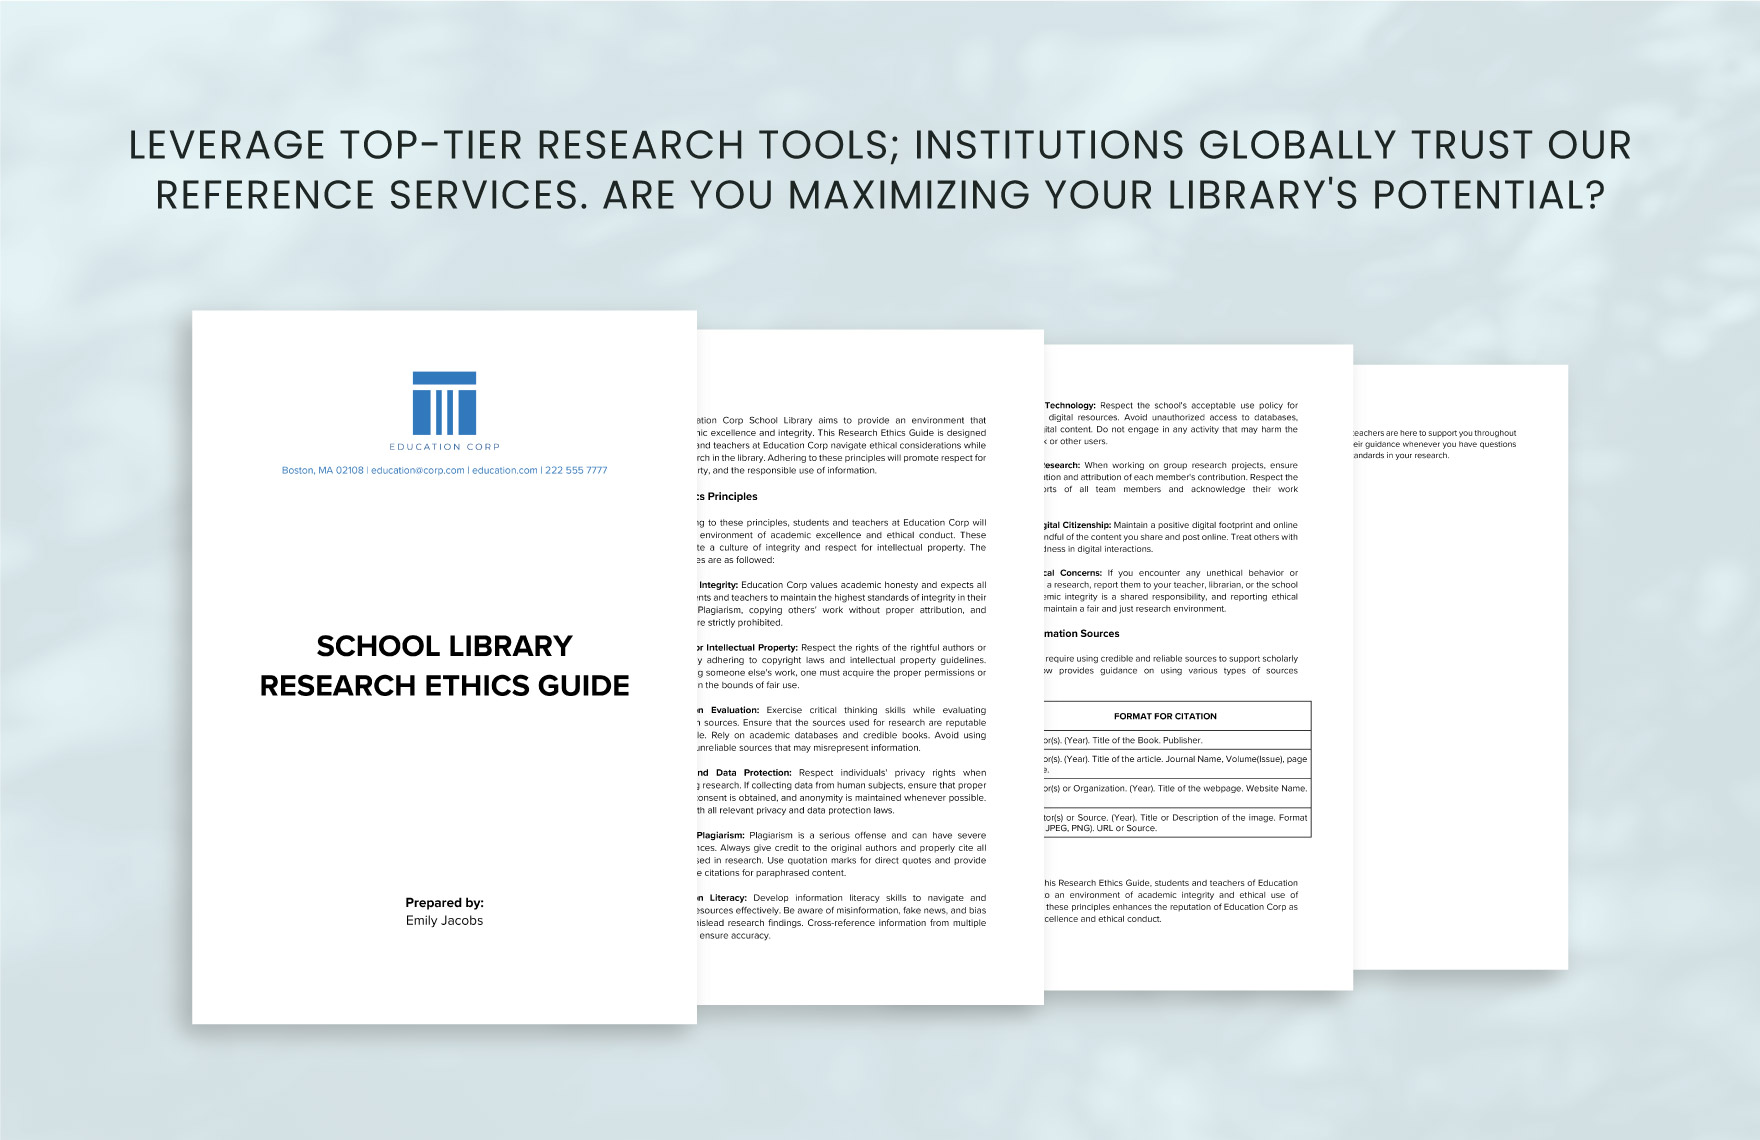 School Library Research Ethics Guide Template